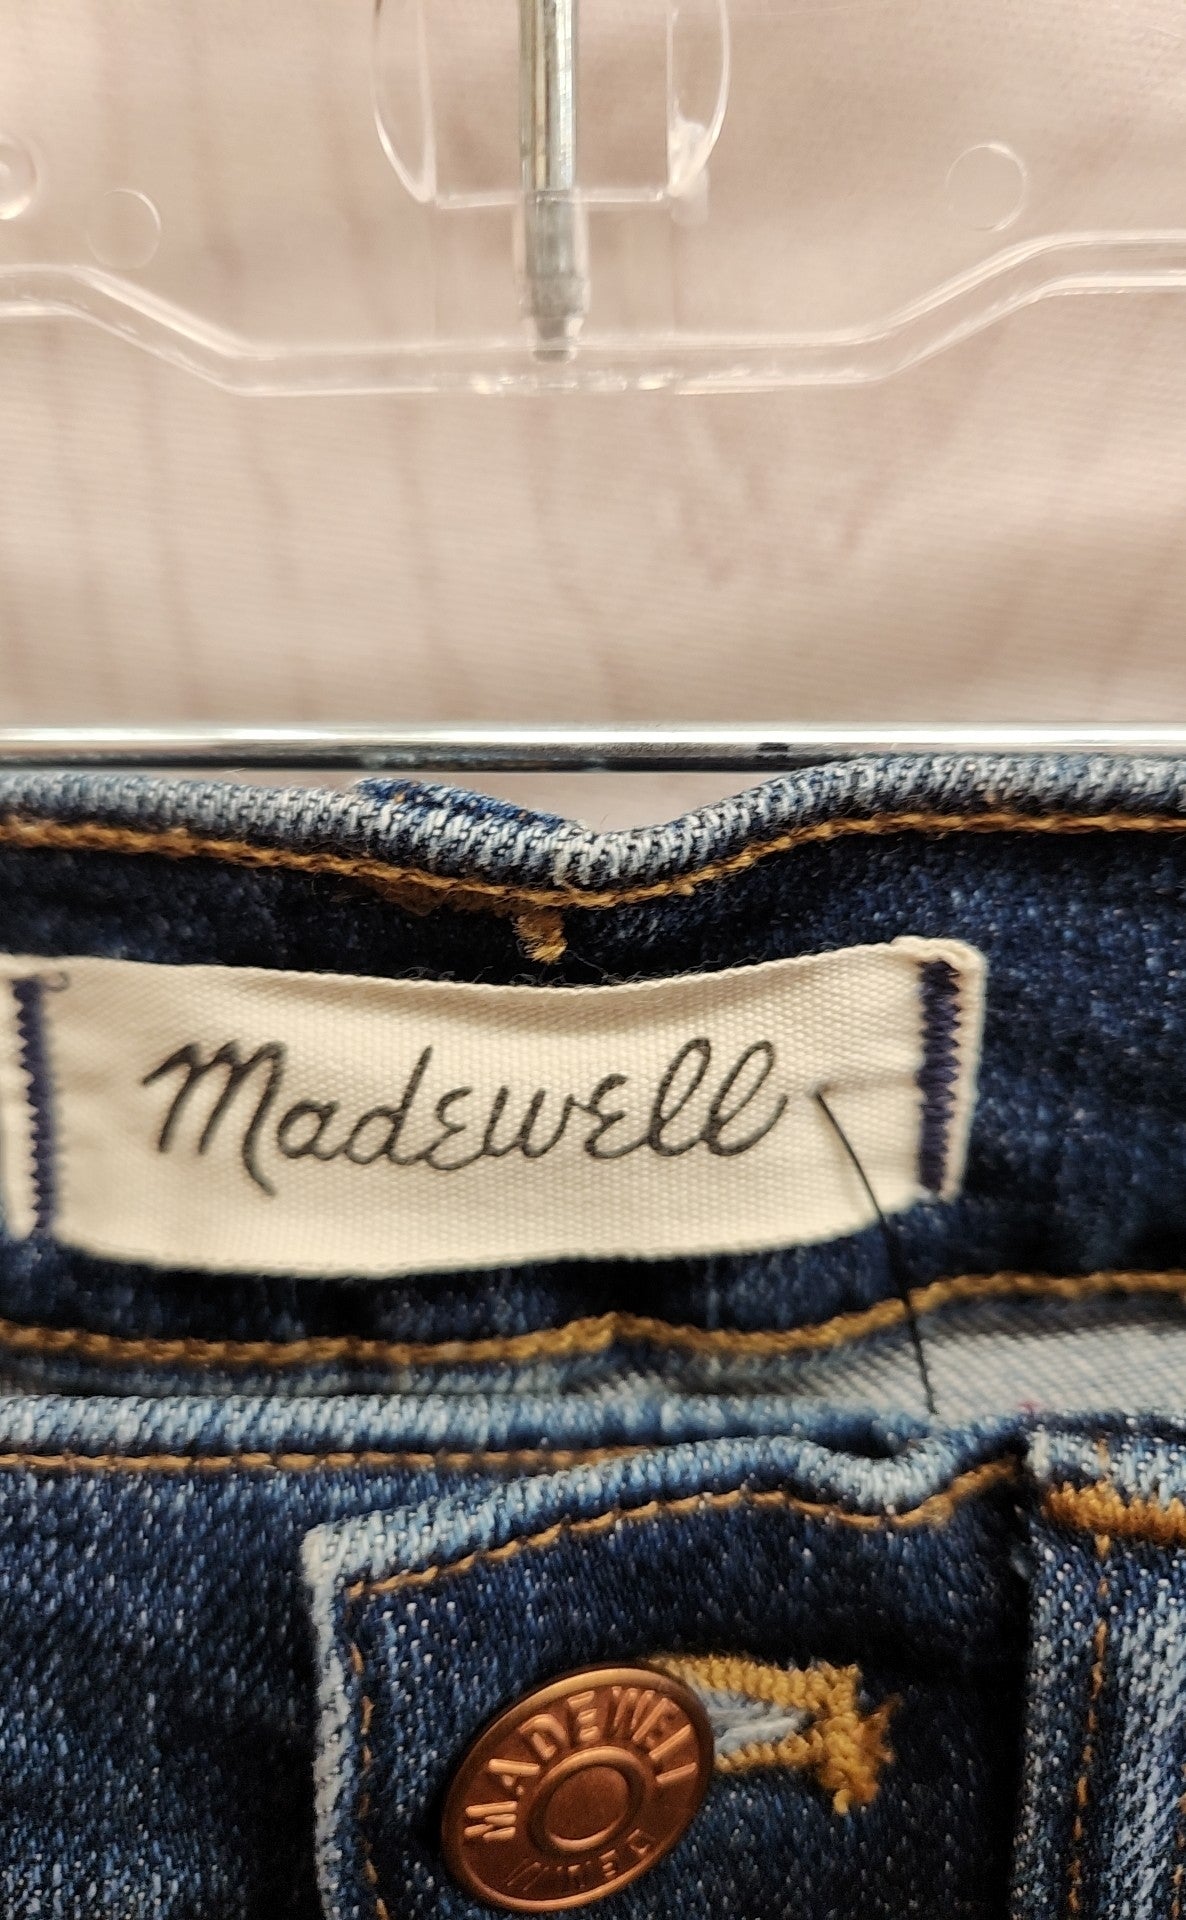 Madewell Women's Size 23 (000) Petite 9" High Rise Skinny Blue Jeans